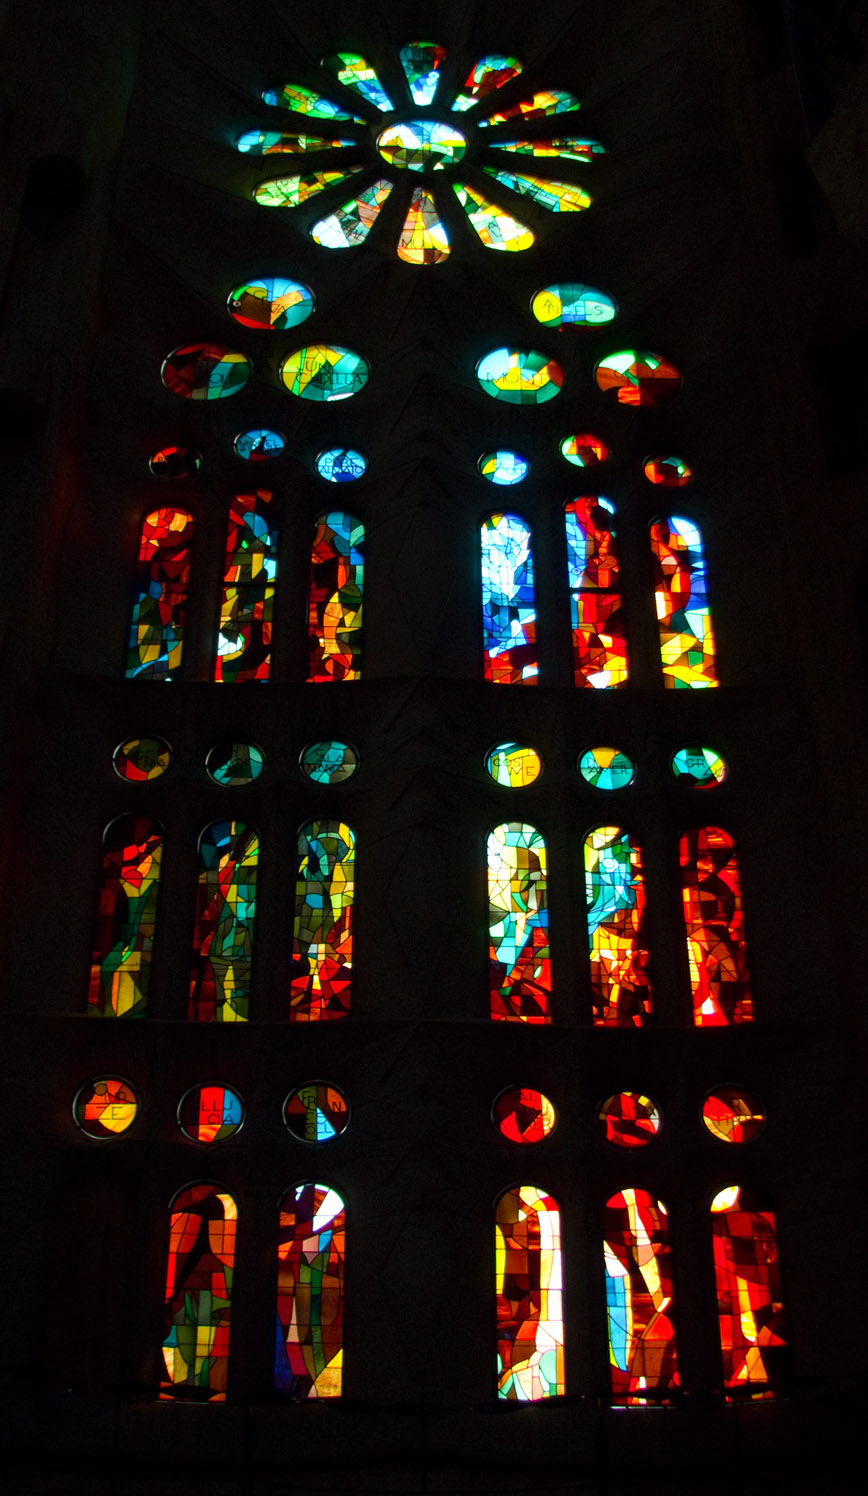 the interior of the stain - stained cathedral has many different colors